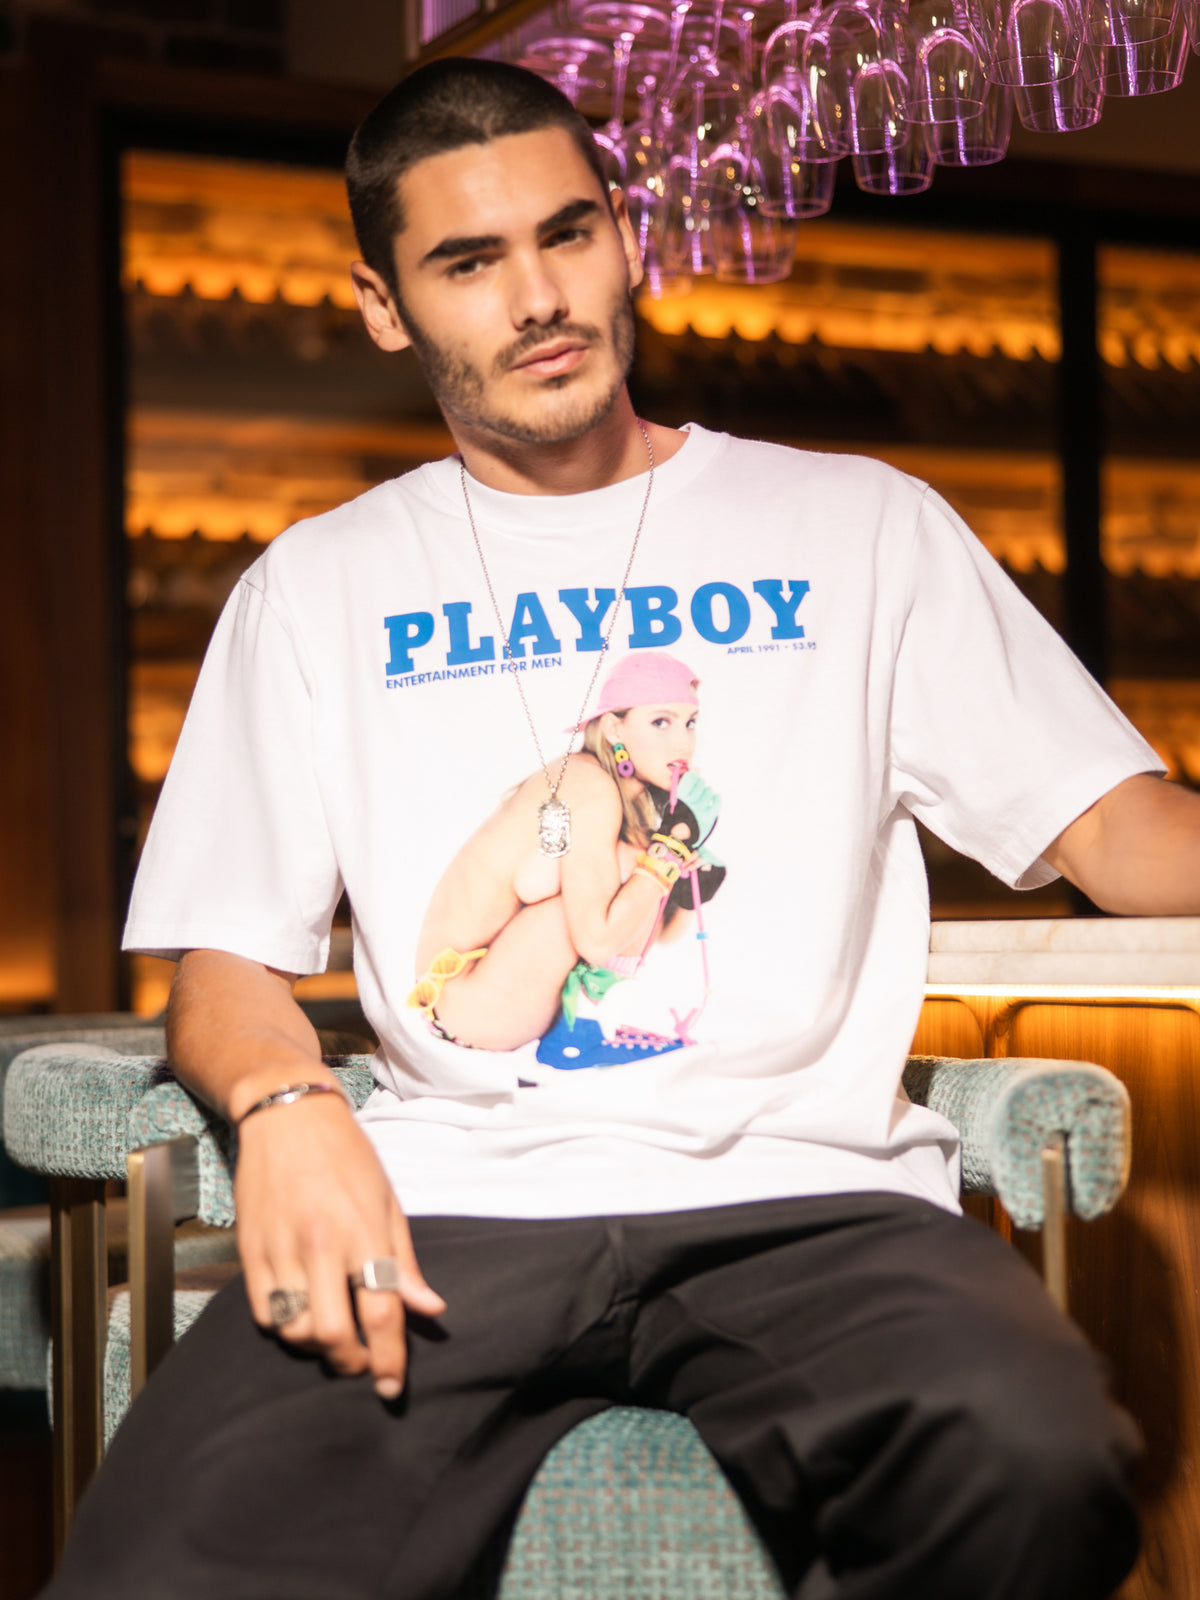 Playboy April 1991 T-Shirt in White